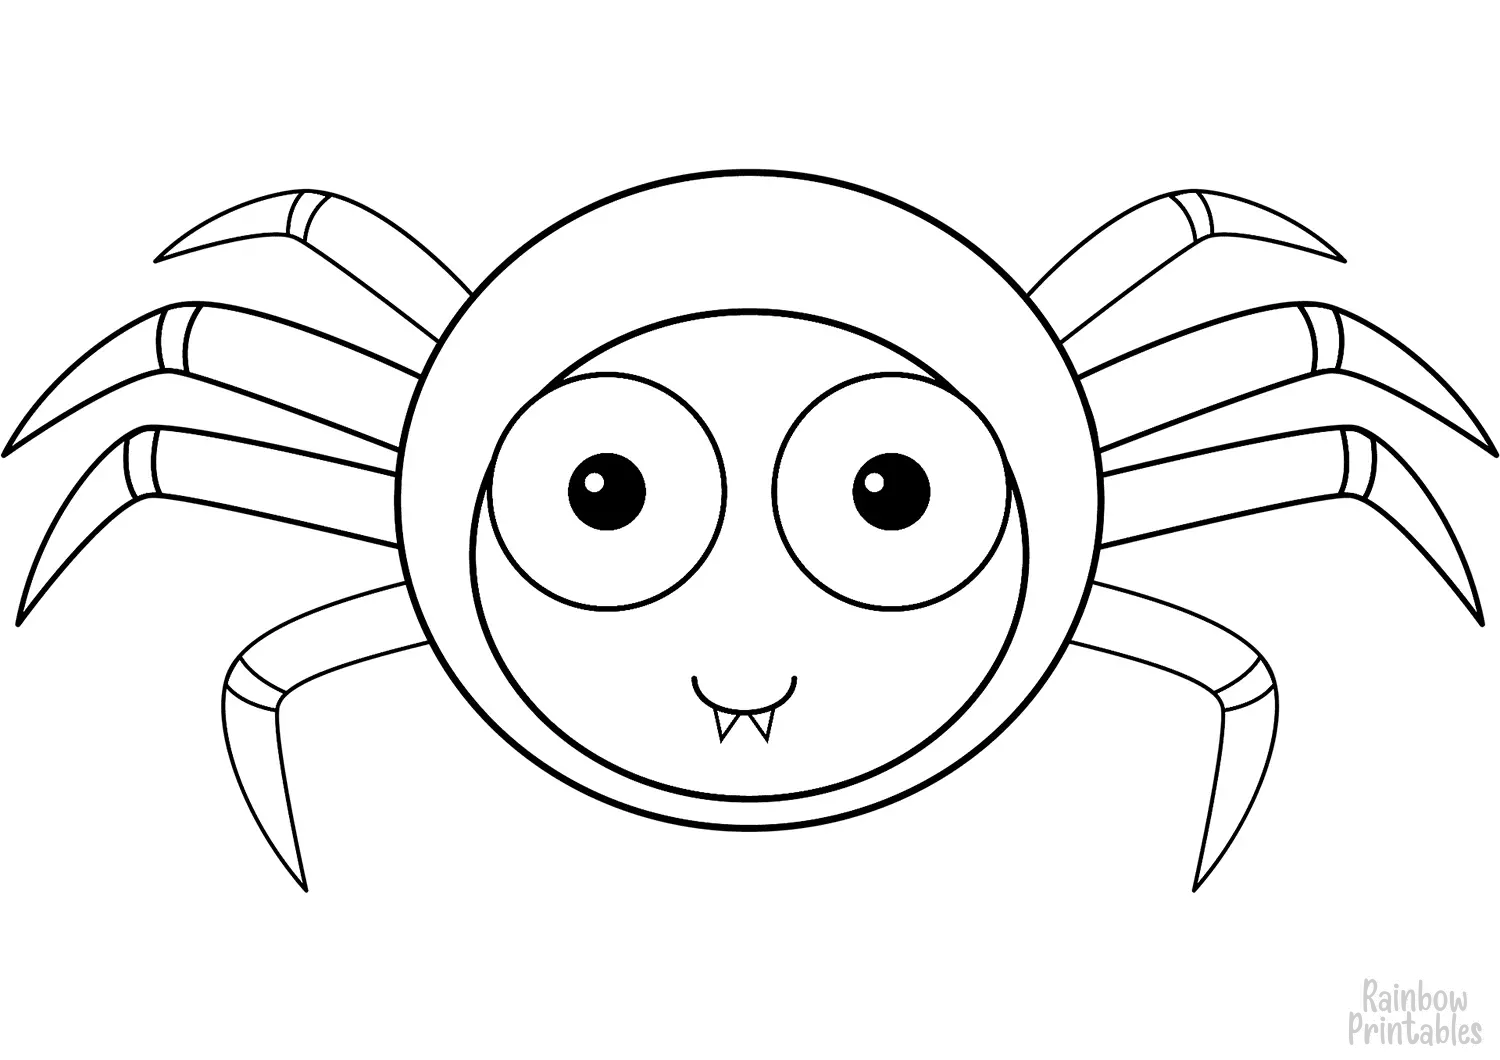 cute-cartoon-spider-coloring-page-Halloween Line Art Drawing Set Free Activity Coloring Pages for Kids-02